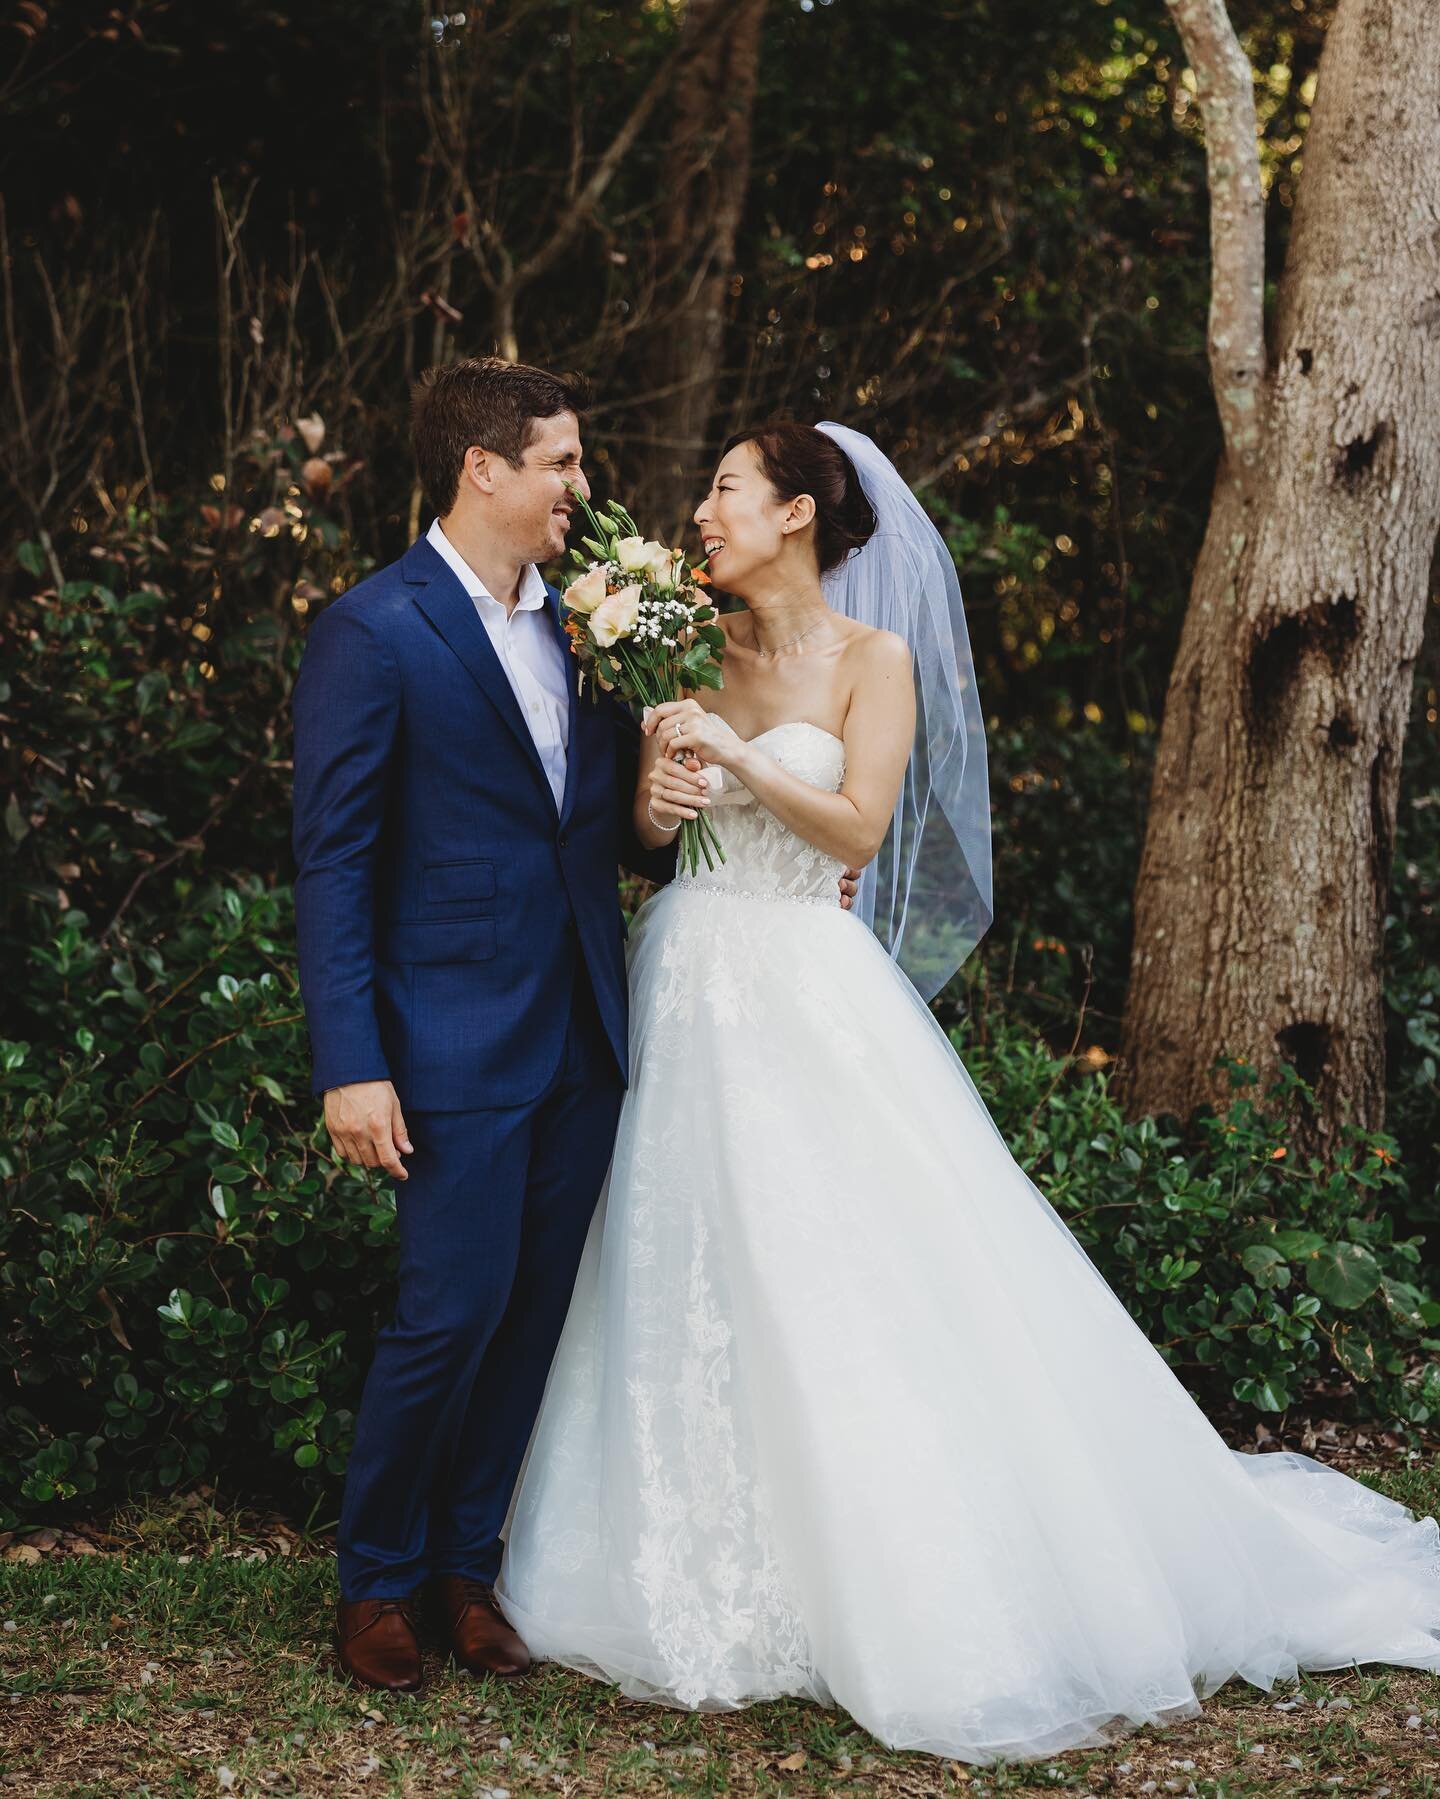 Moonsun + Peter
Afternoon ceremony at Casuarina Gardens 🌹
Team 👇
Photographer @leahcohenphotography 
Videographer @vc_weddings 
Celebrant @noosaheadscelebrant 
Hair and makeup @beauty.on.the.move 

#noosaphotographer #noosaweddings #eloped #noosace